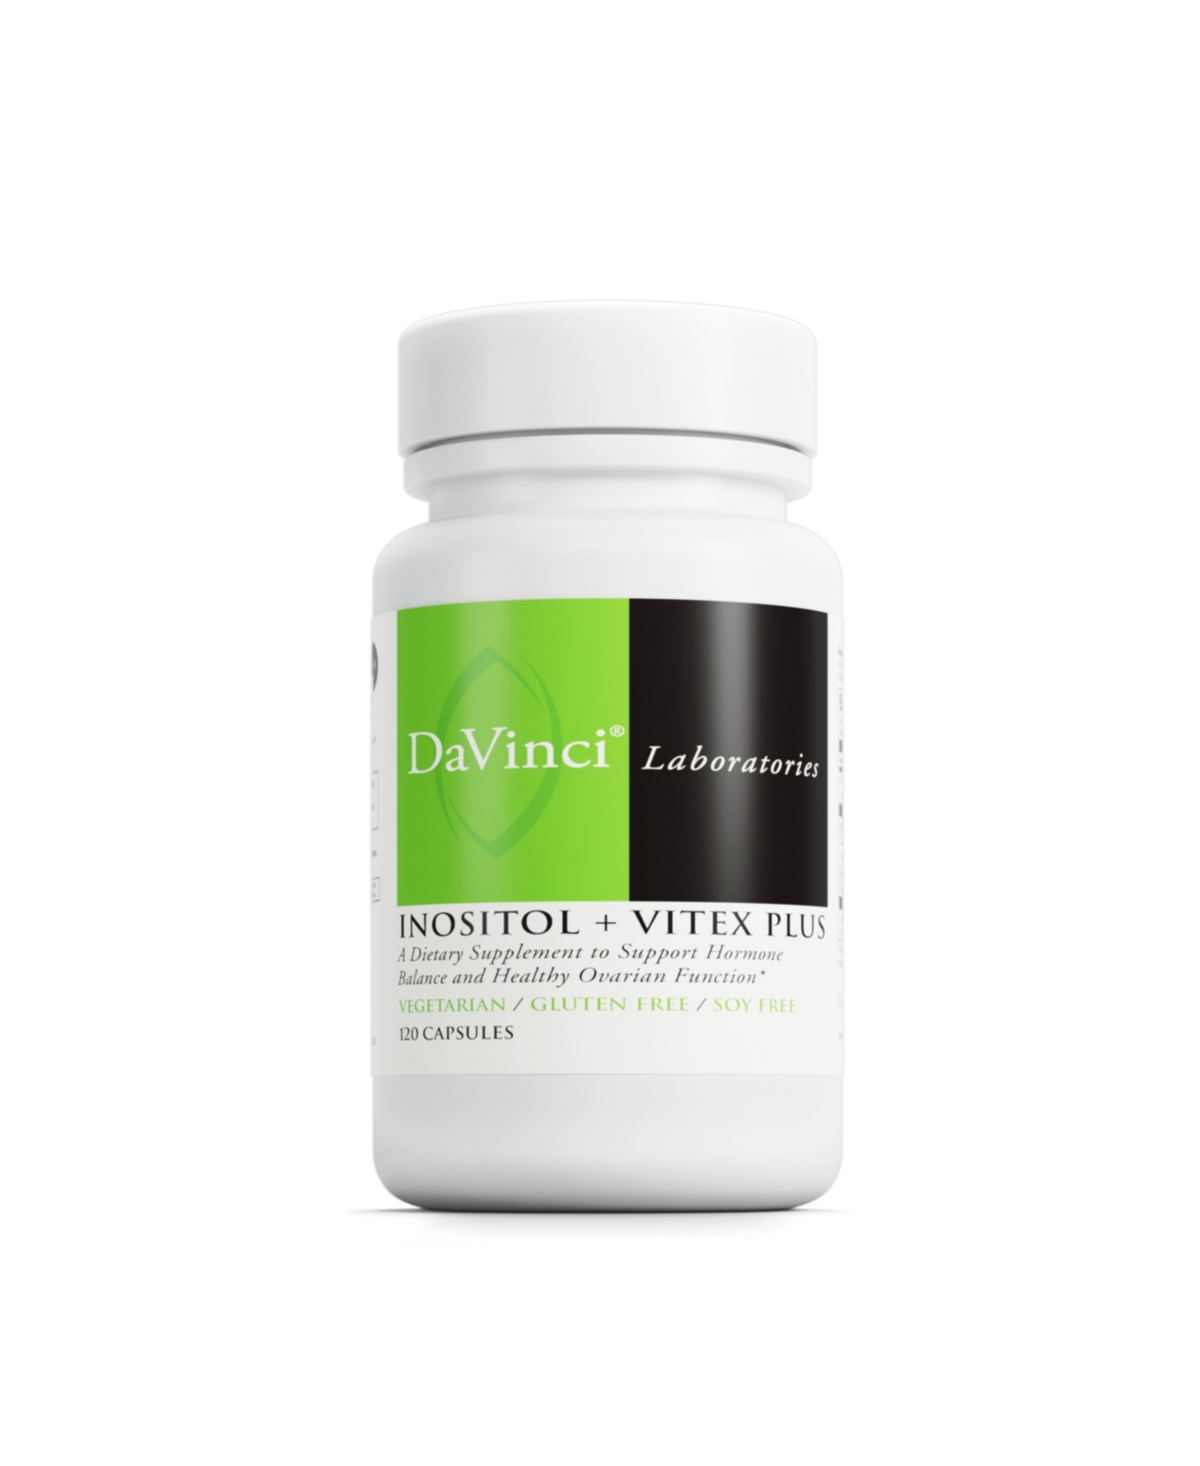 Davinci Labs - Inositol + Vitex Plus - A Dietary Supplement to Support Hormone Balance and Healthy Ovarian Function - Vegetarian,